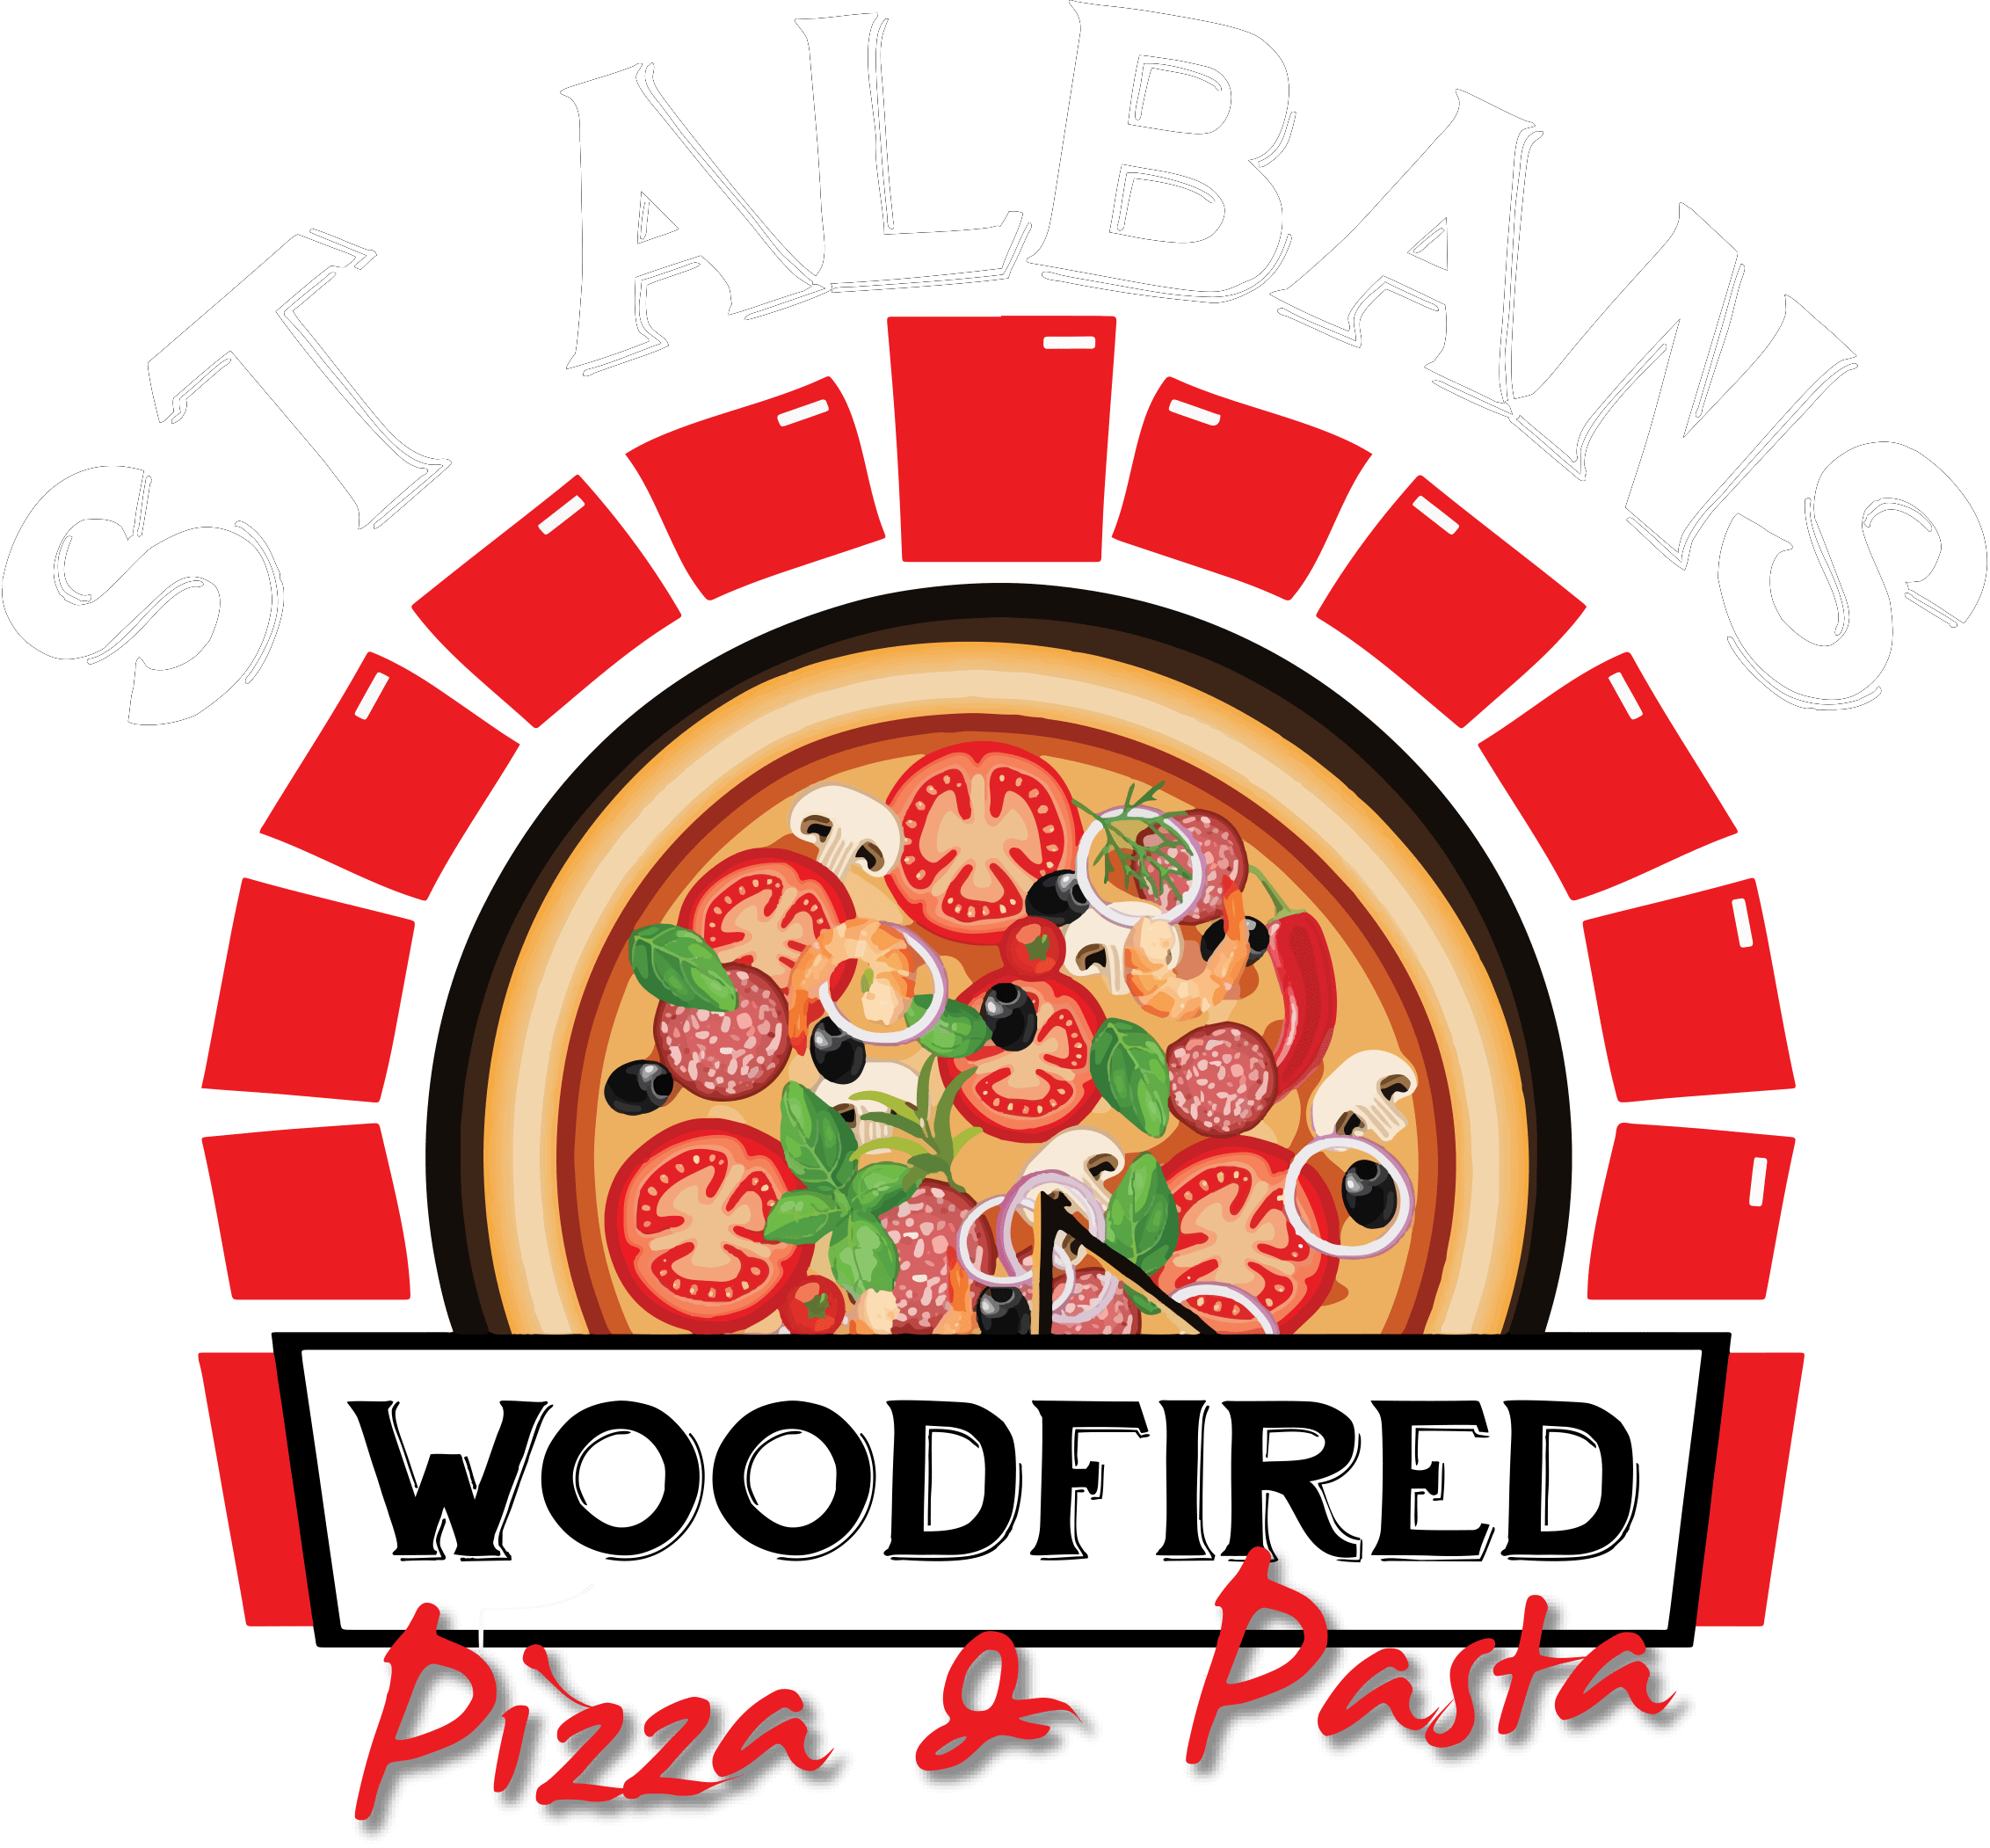 St Alban's Woodfired Pizza & Pasta